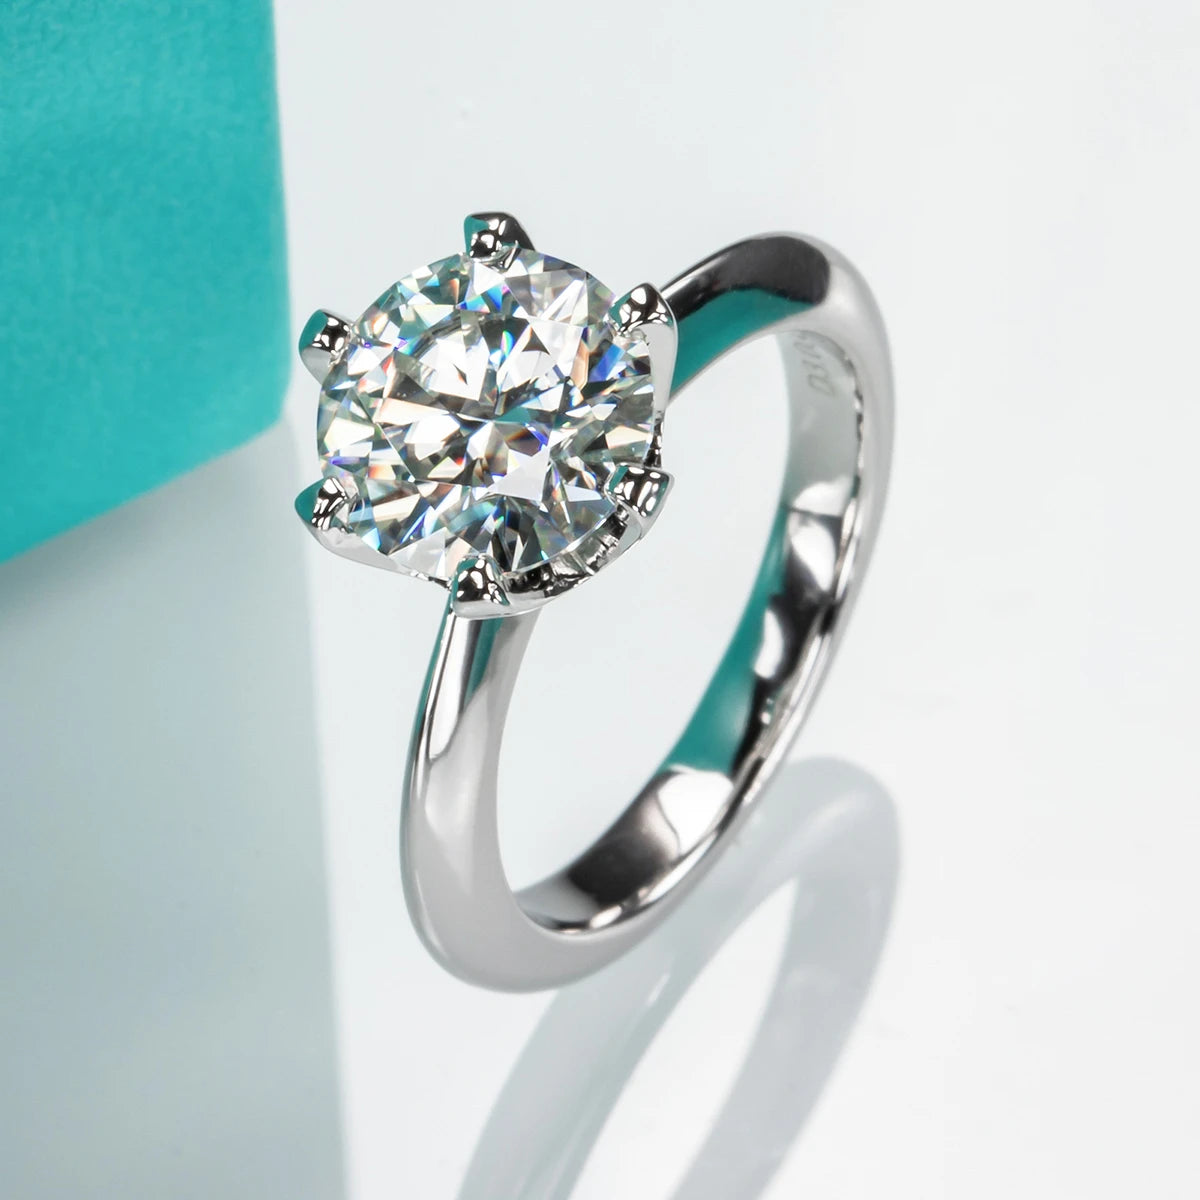 A luxurious silver ring with a large round-cut moissanite center stone in a six-prong setting, placed near a turquoise box. Introducing Moissanite Solitaire Rings: Stunning Engagement Jewelry by Maramalive™.